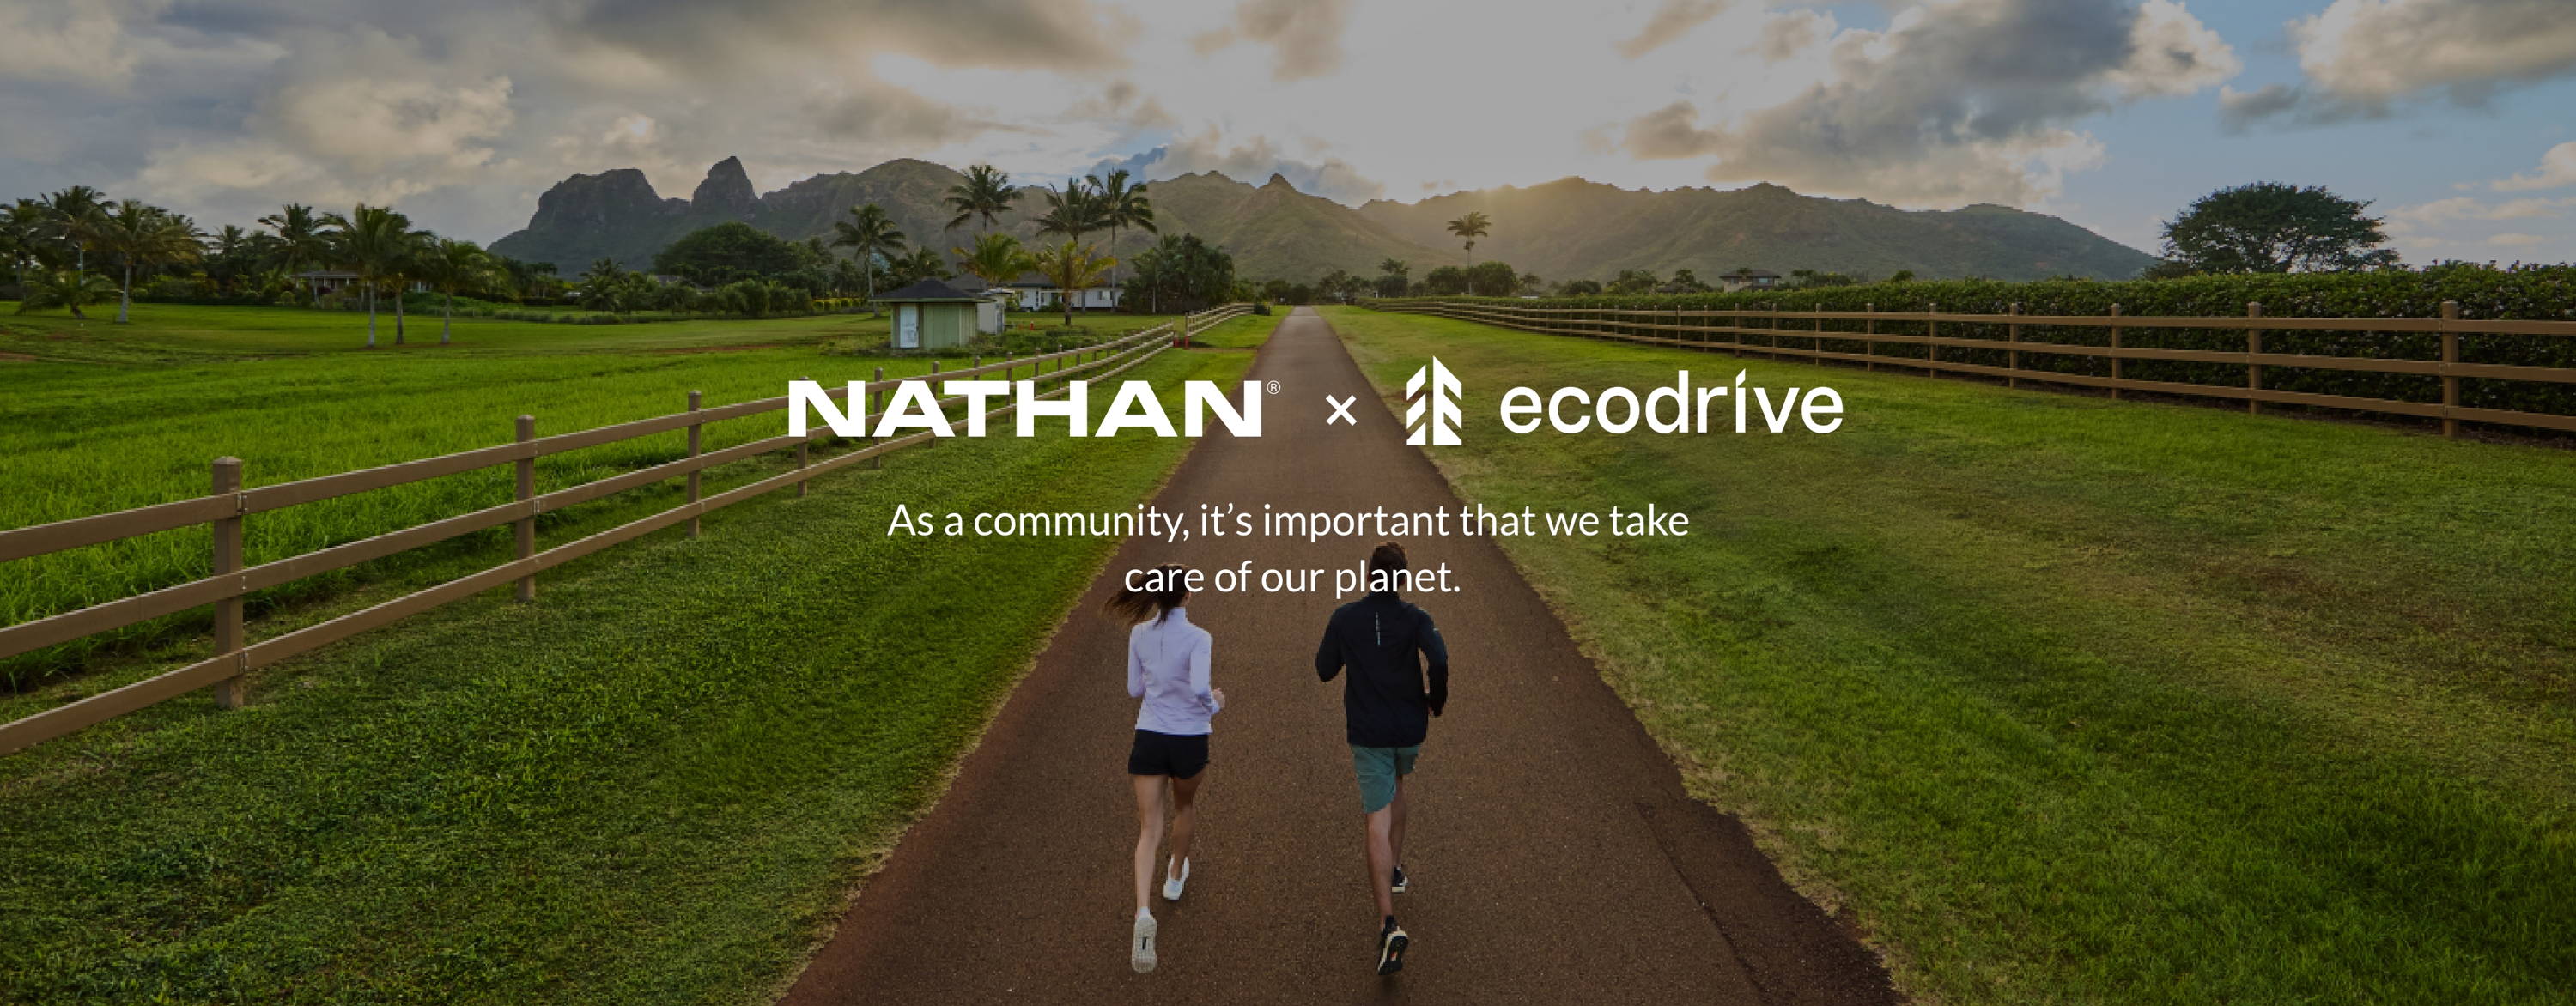 Nathan x ecodrive As a community of outdoors-people, it's important that we take care of our planet.